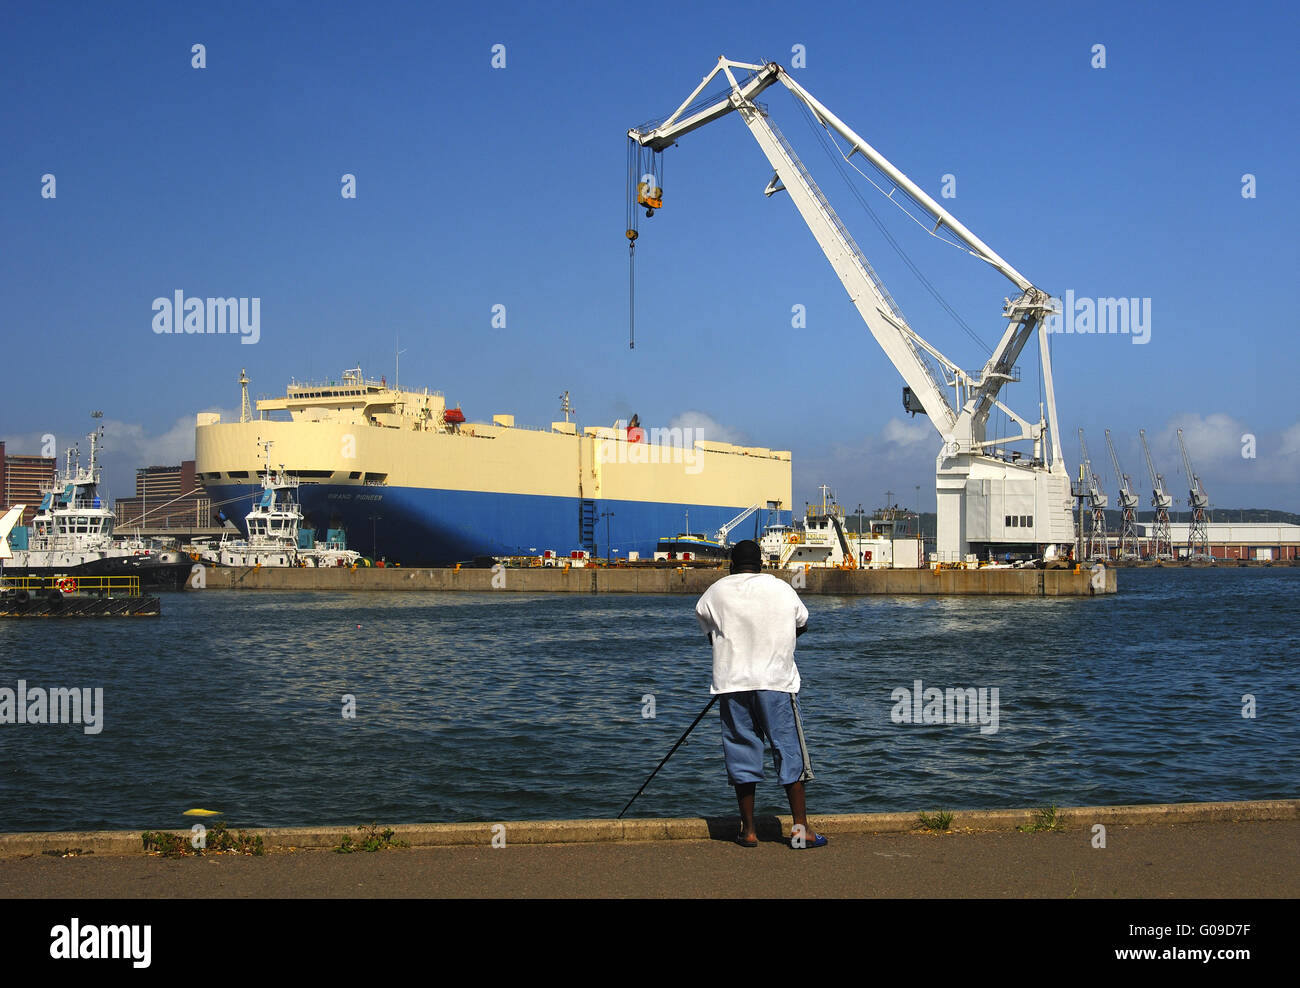 Angler in the port basin of Durban, South Africa Stock Photo